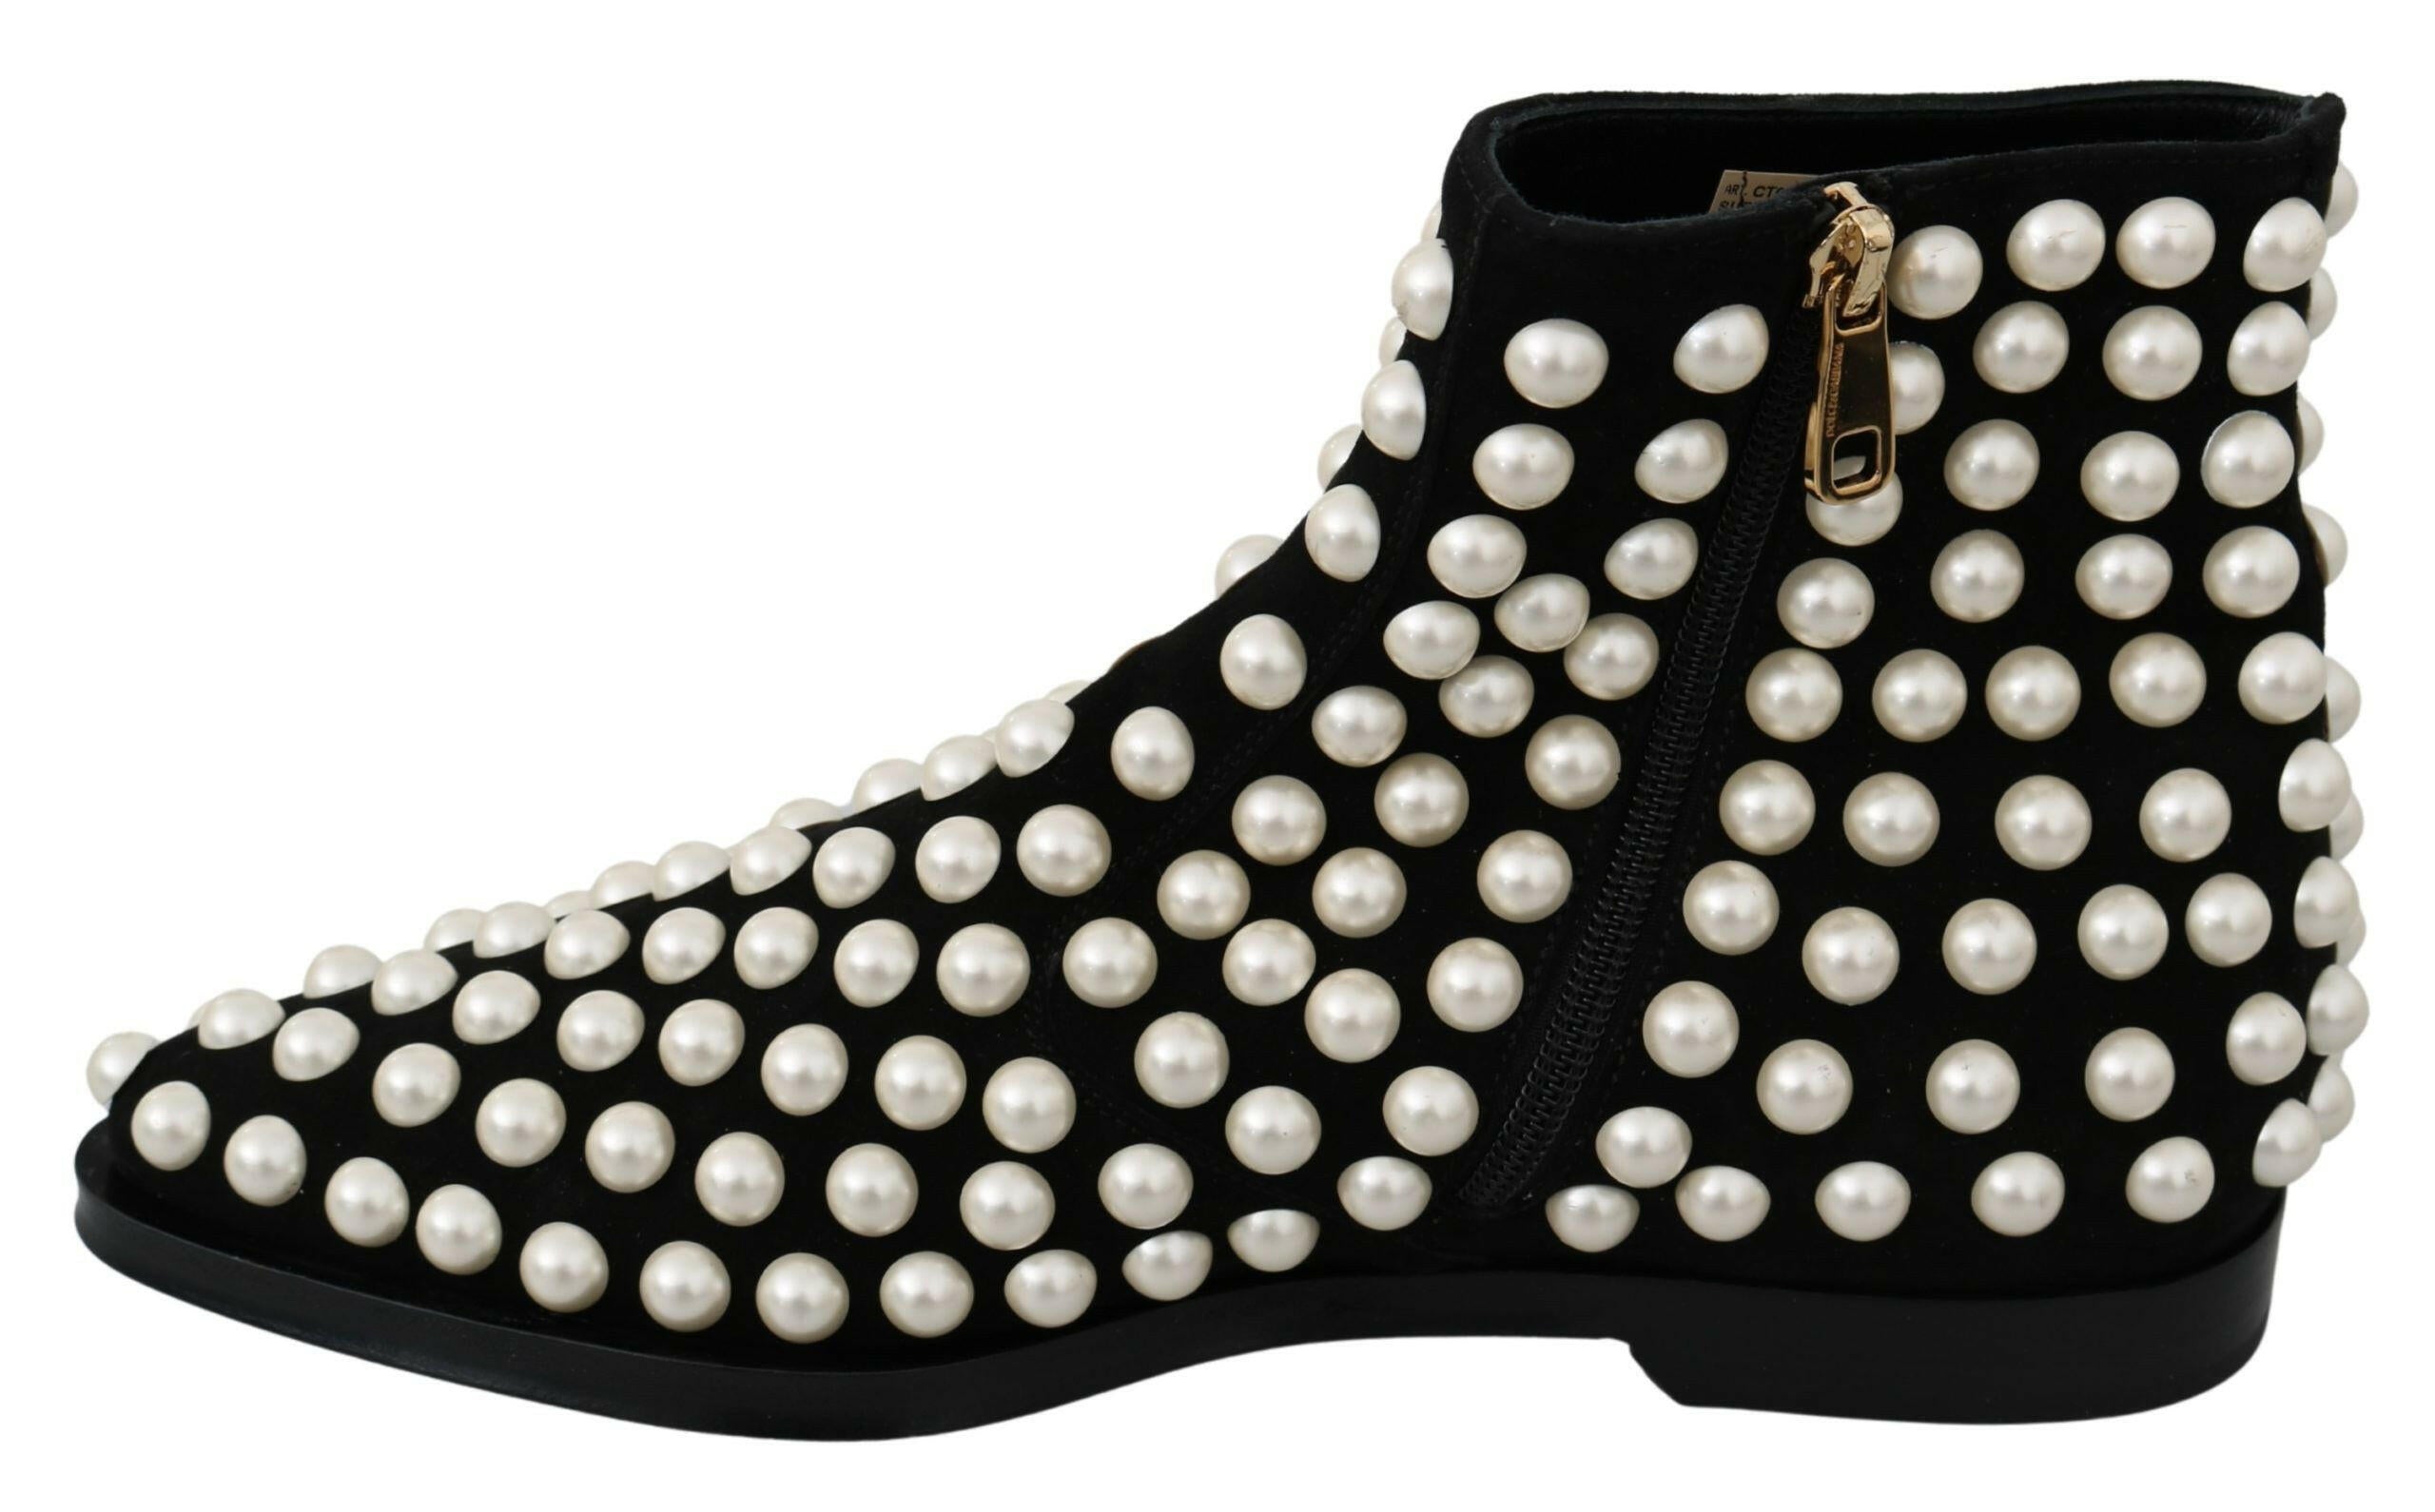 Dolce & Gabbana Black Suede Pearl Studs Boots Shoes - GENUINE AUTHENTIC BRAND LLC  